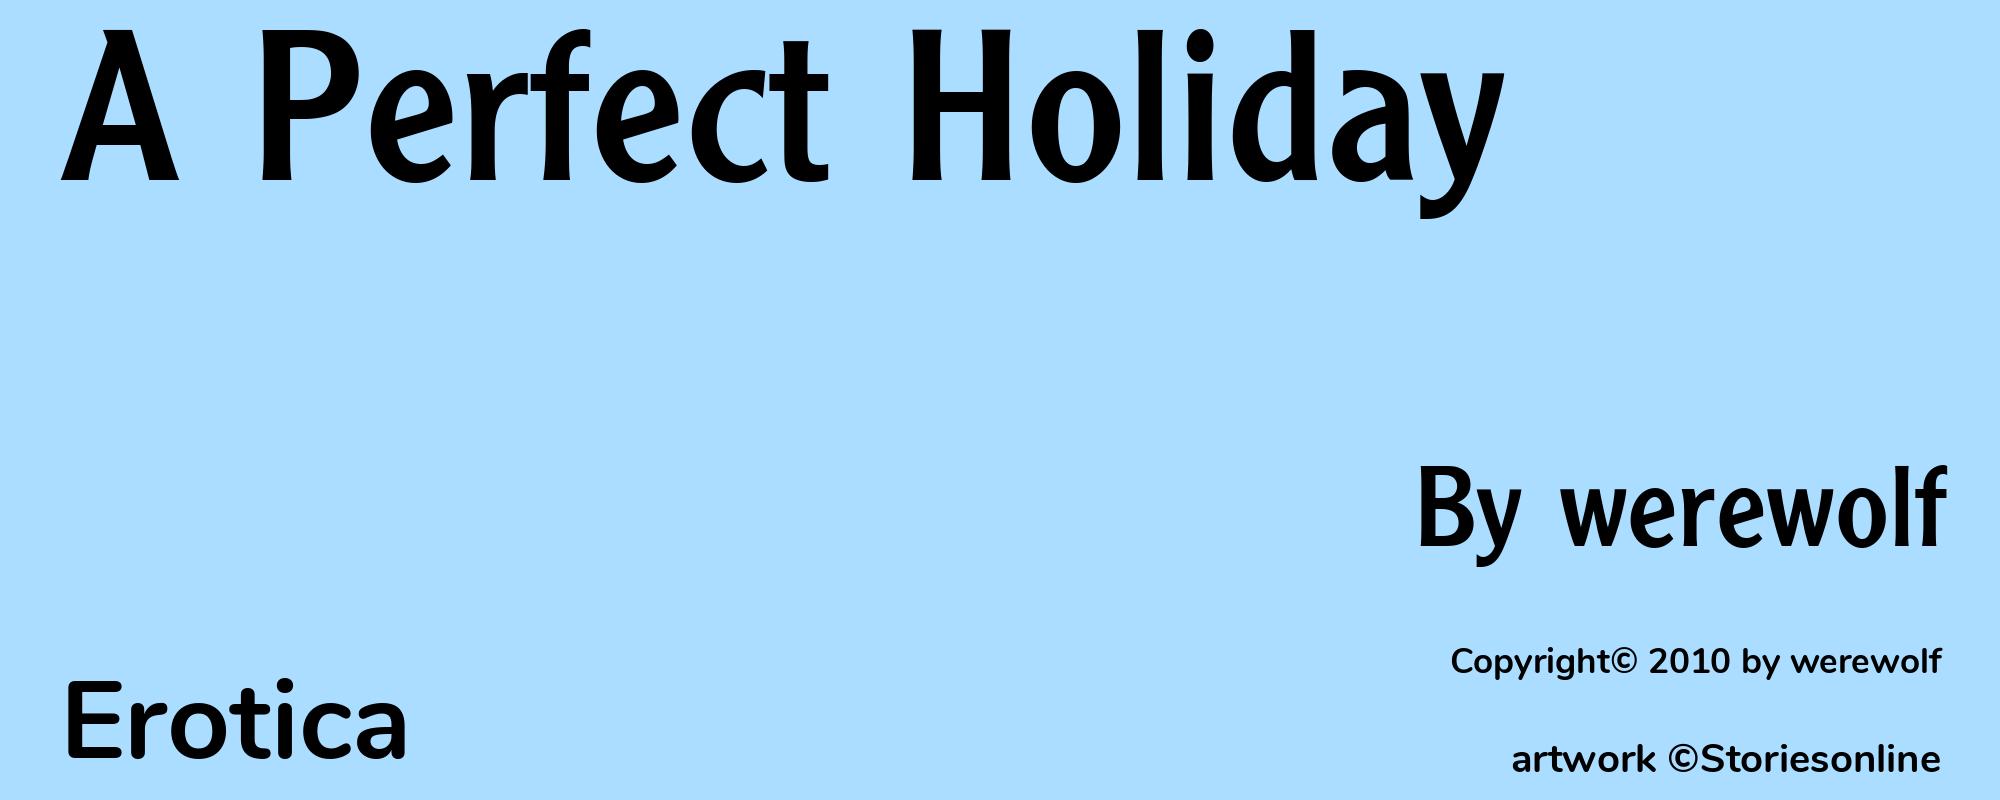 A Perfect Holiday - Cover